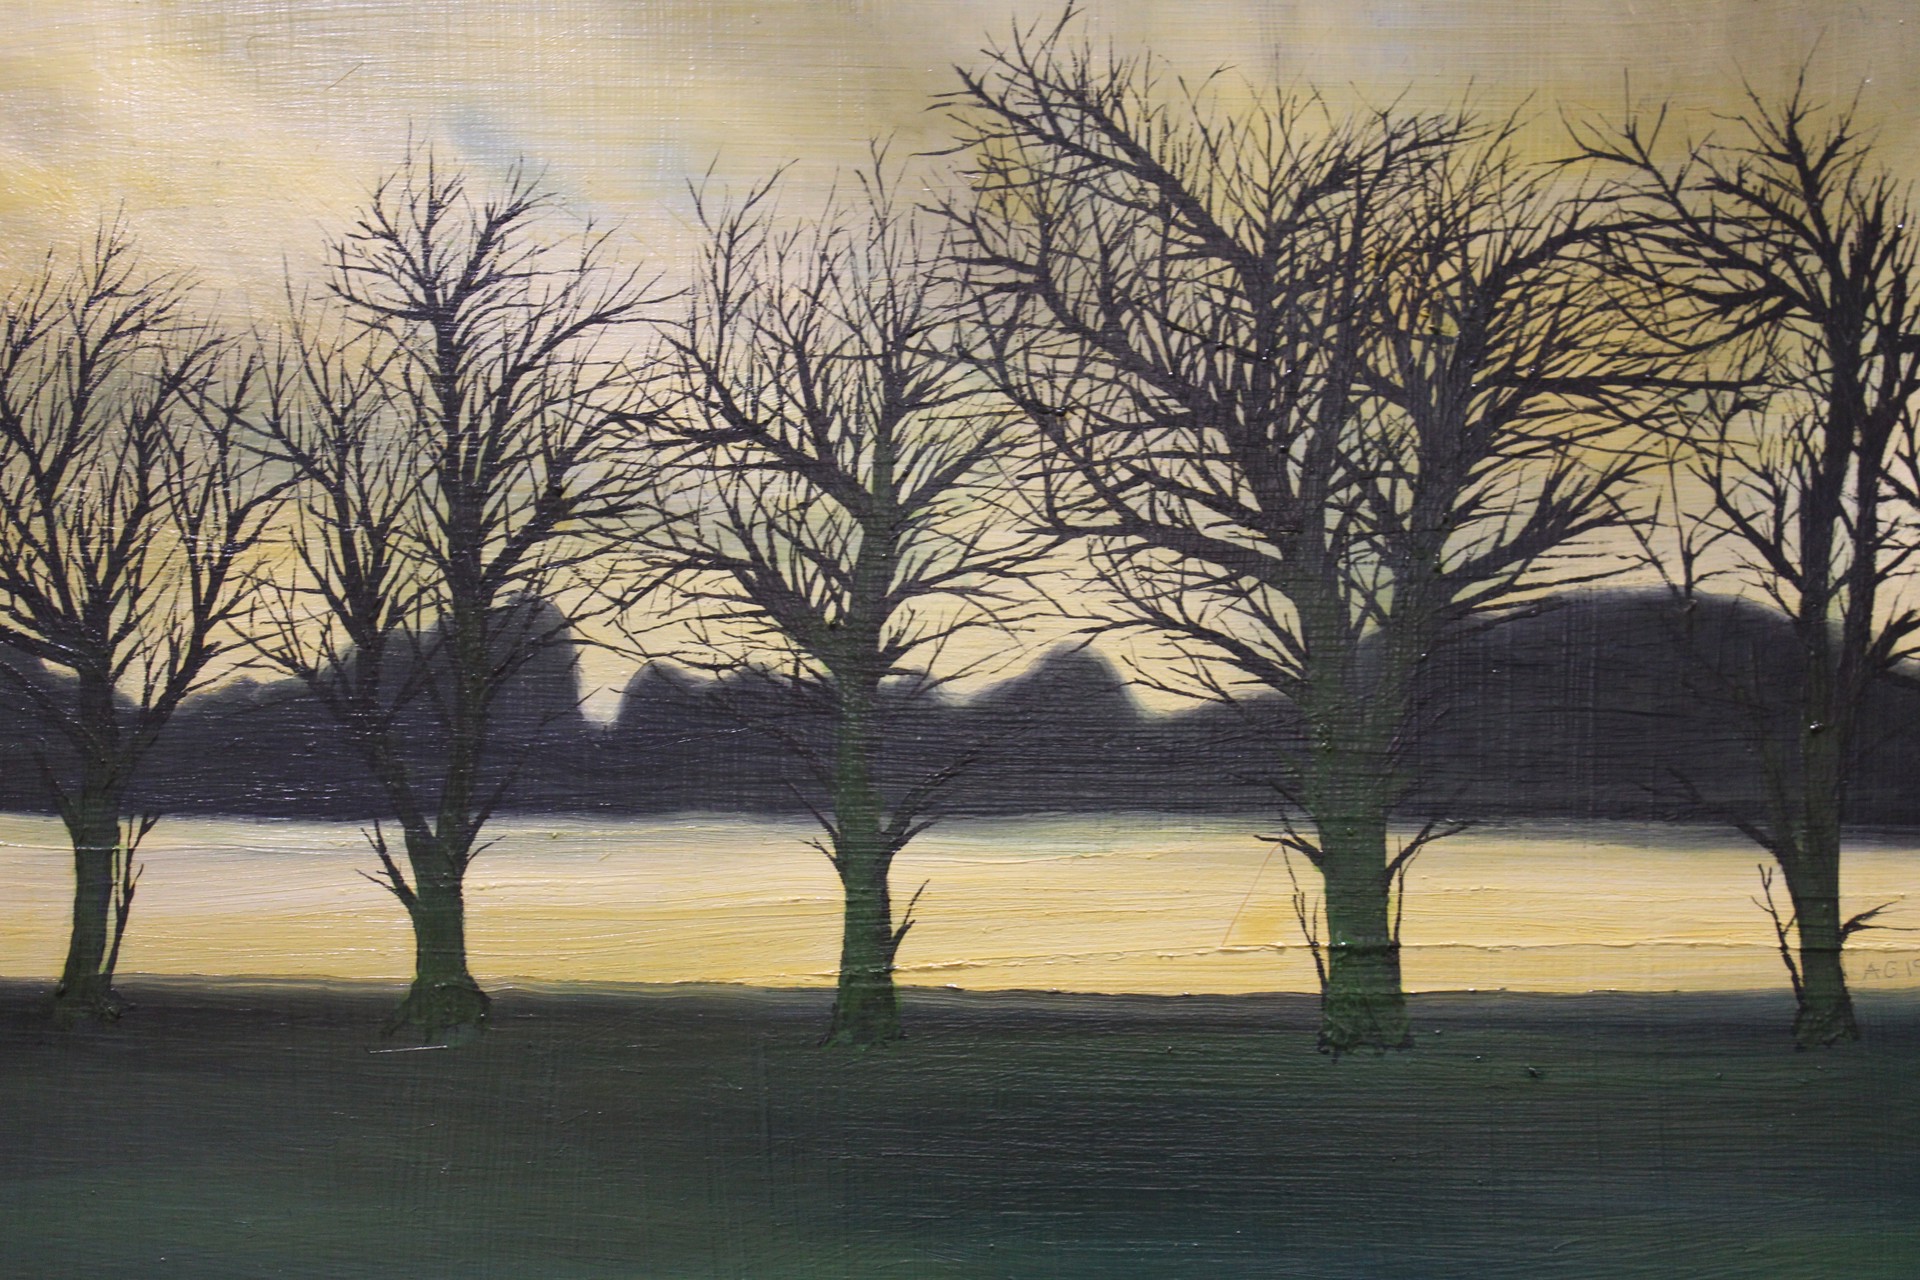 Evening on the River (M150) by Alan Gerson